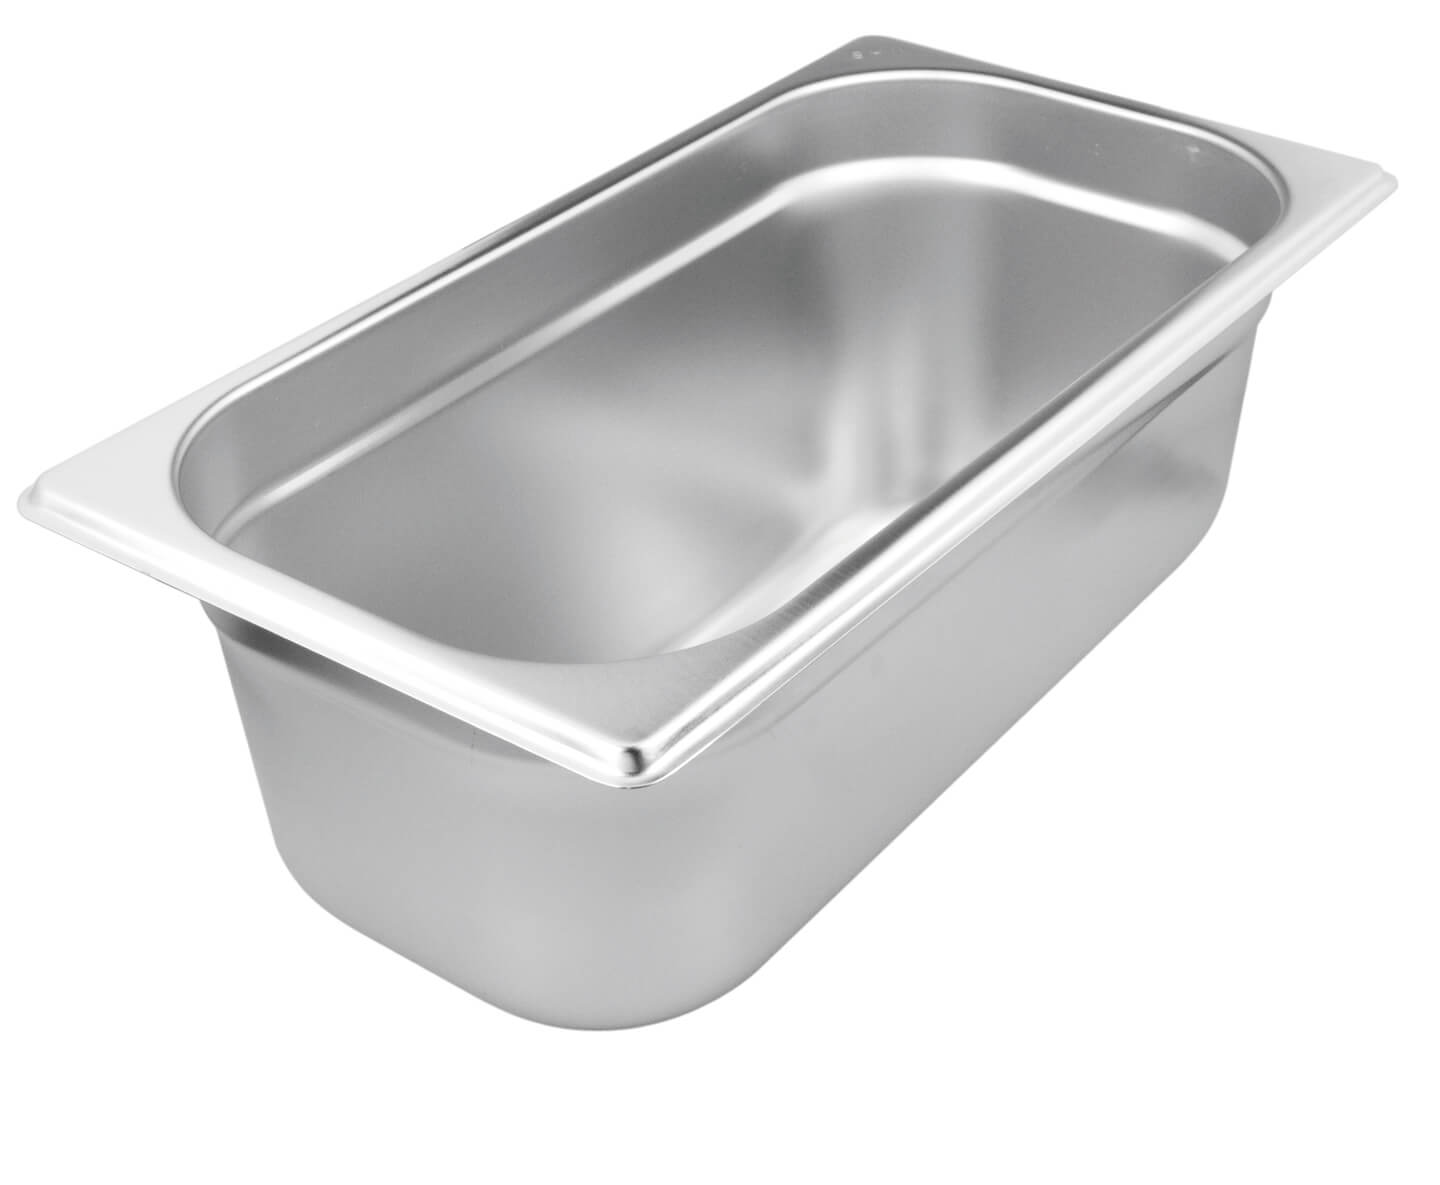 Gastronomy-standard container 65mm depth - stainless steel (GN 1/3)